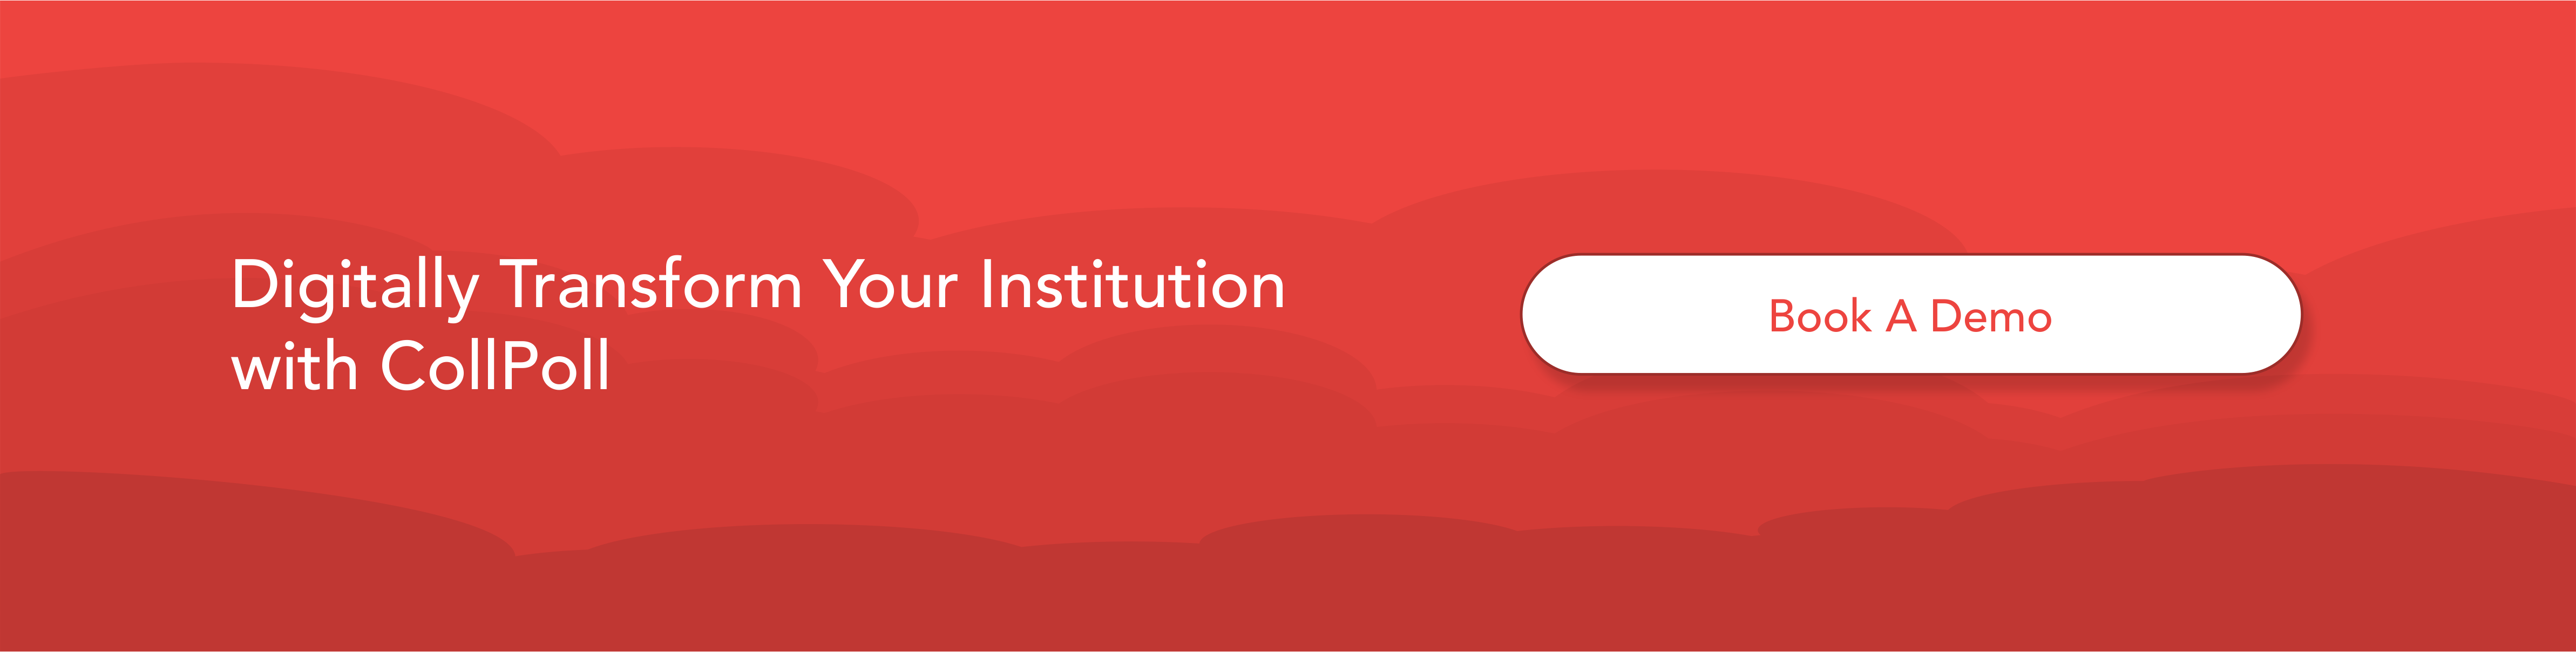 Digitally Transform Your Institution with CollPoll